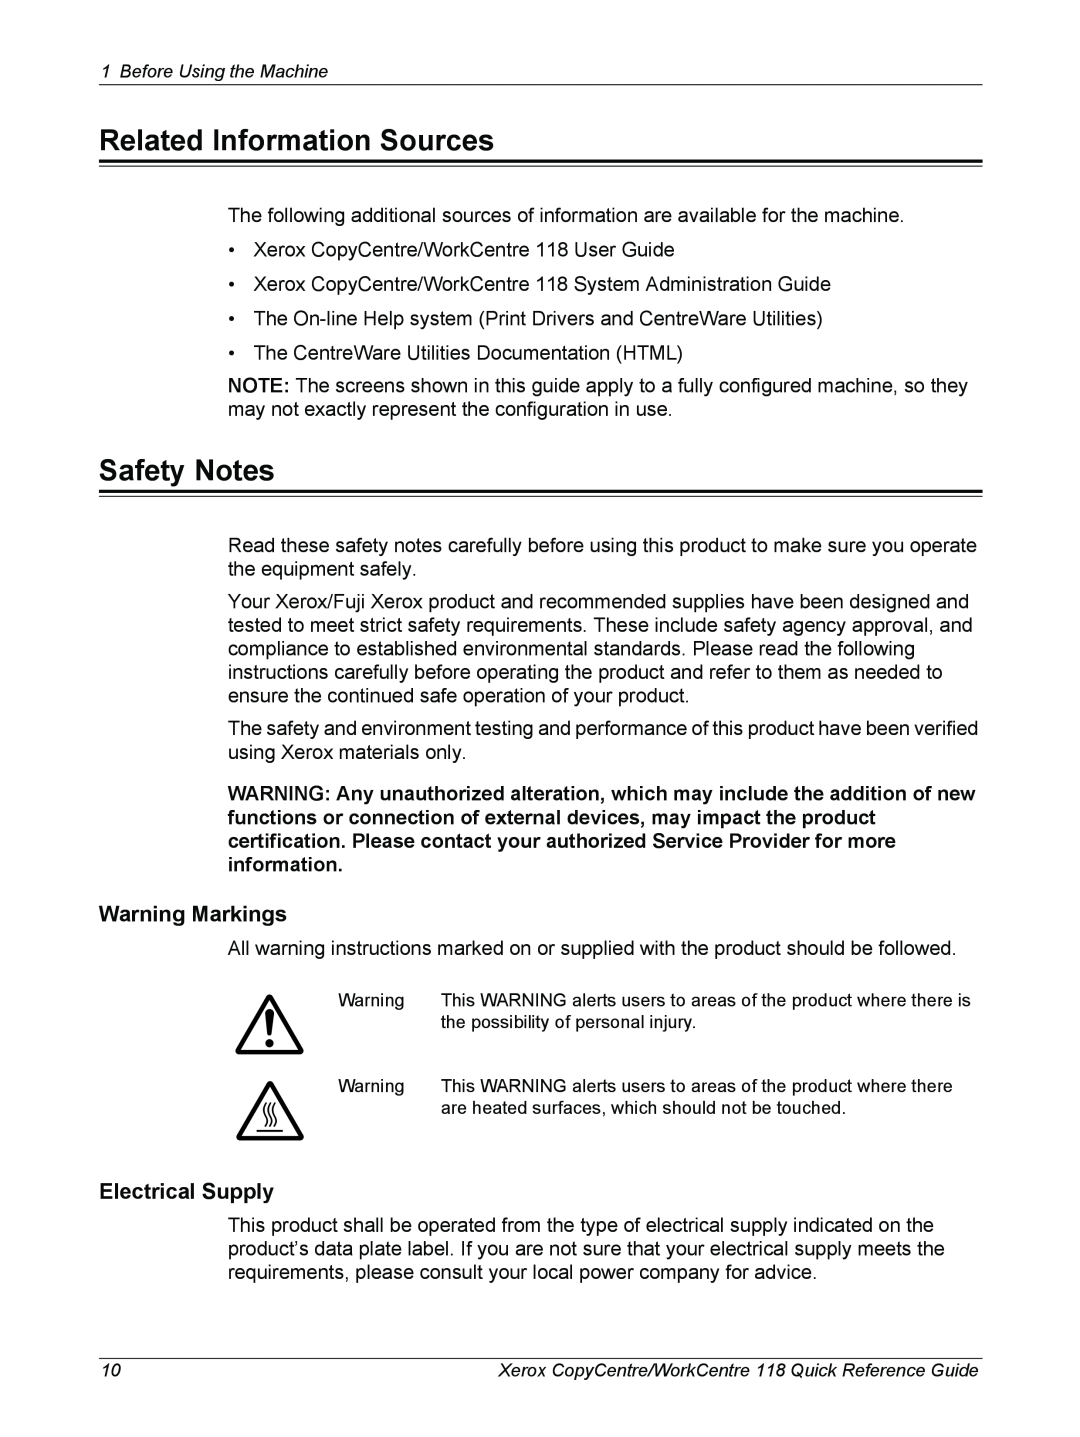 Xerox M118i, C118 manual Related Information Sources, Safety Notes, Warning Markings, Electrical Supply 